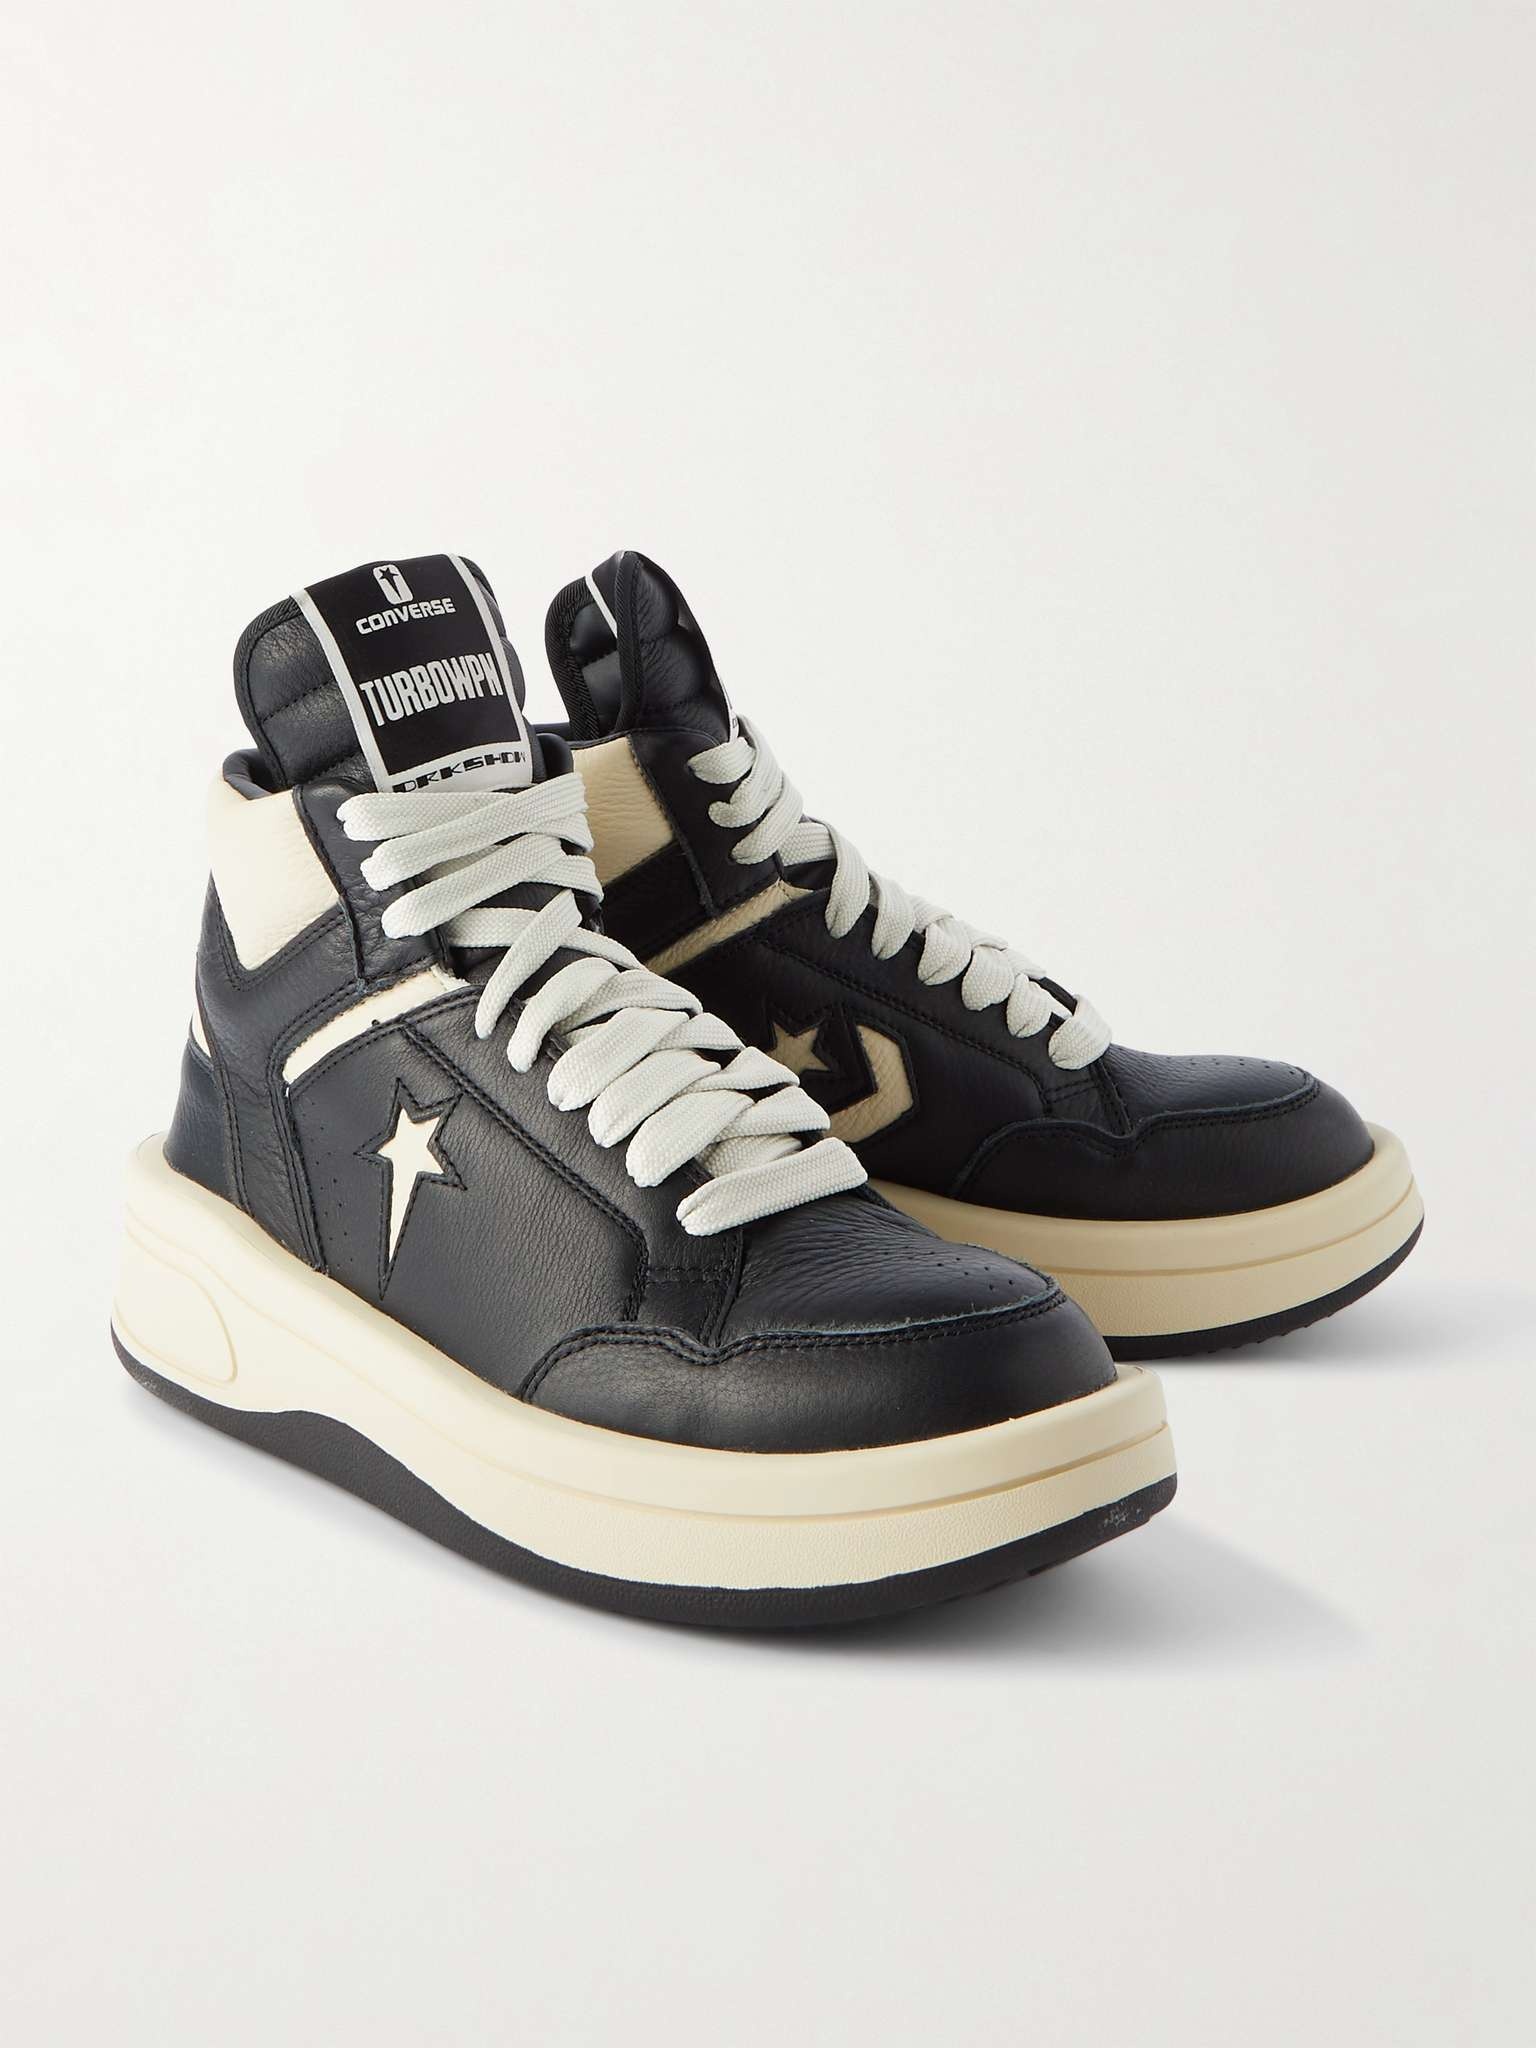 + Converse TURBOWPN Full-Grain Leather High-Top Sneakers - 4